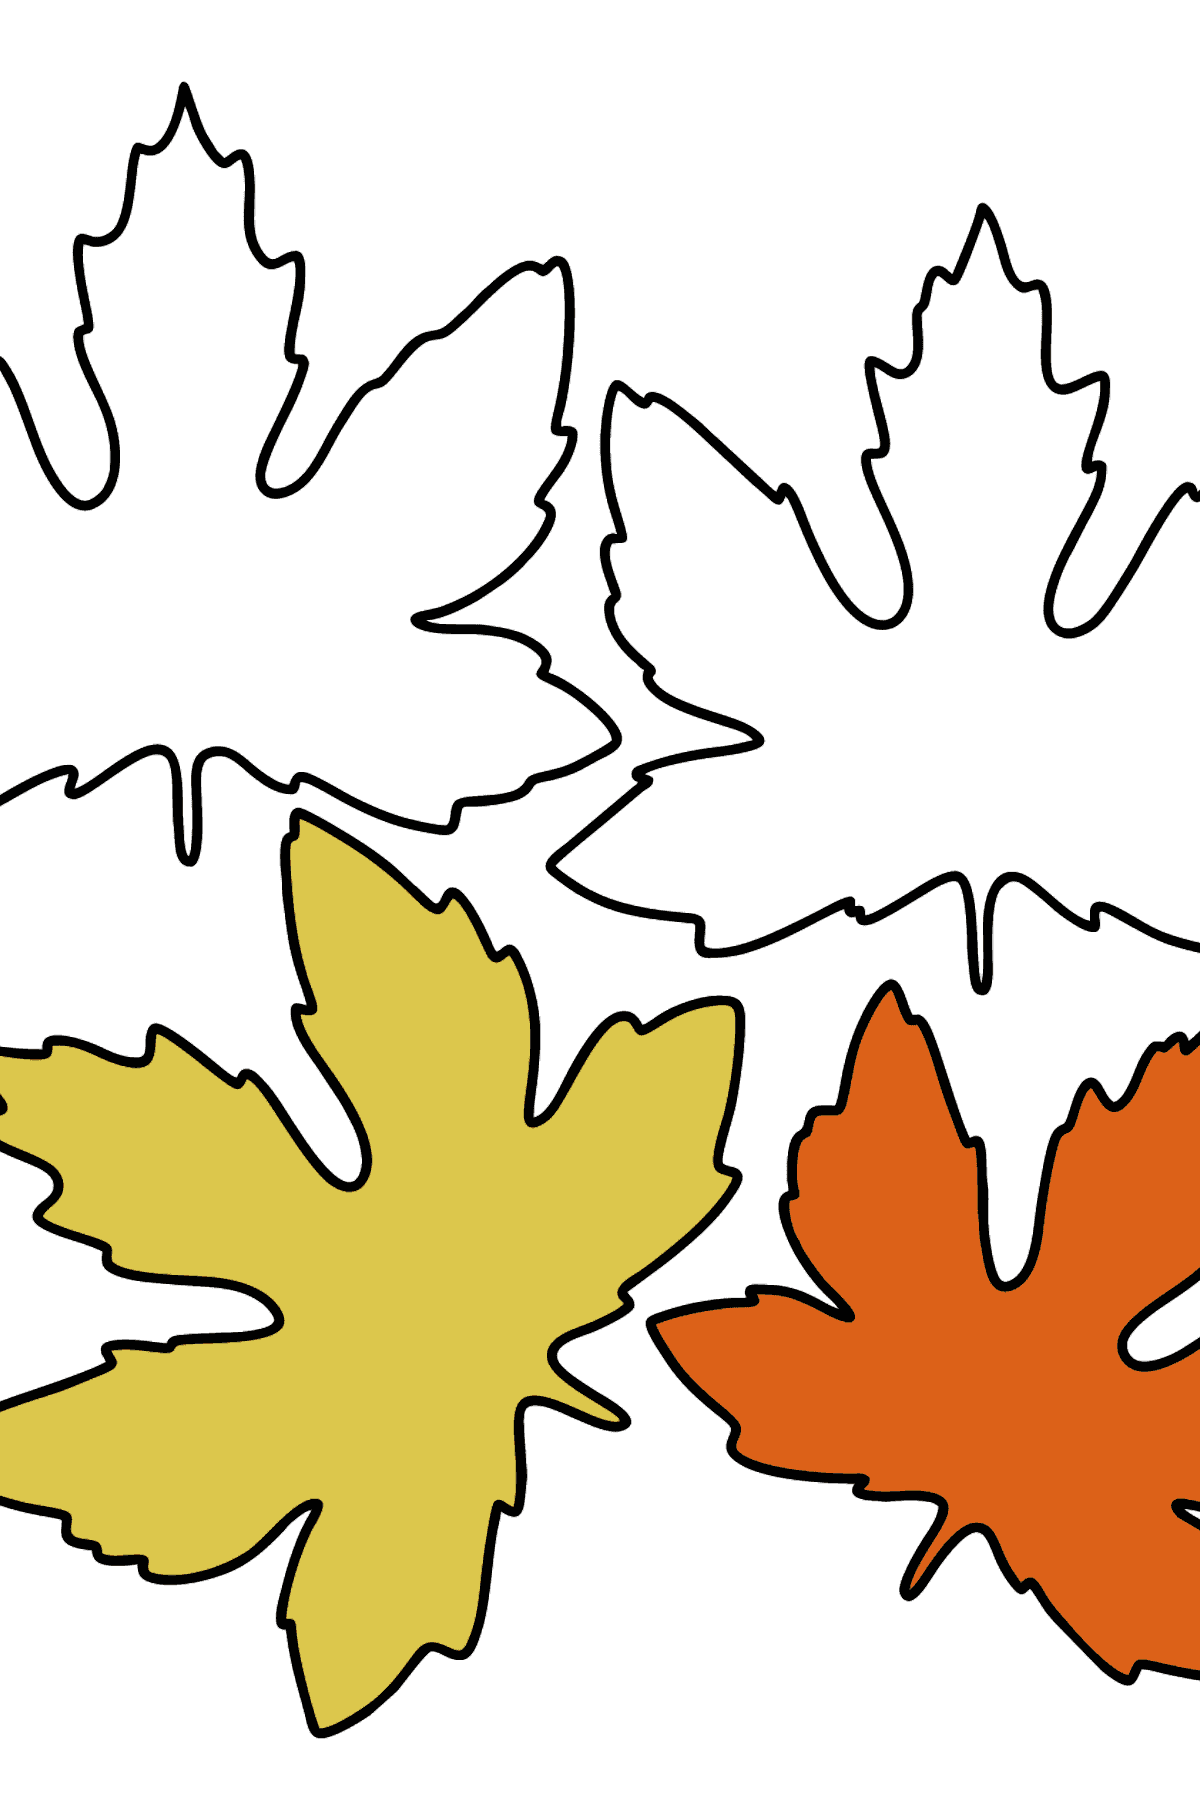 Maple Leaves coloring page - Coloring Pages for Kids